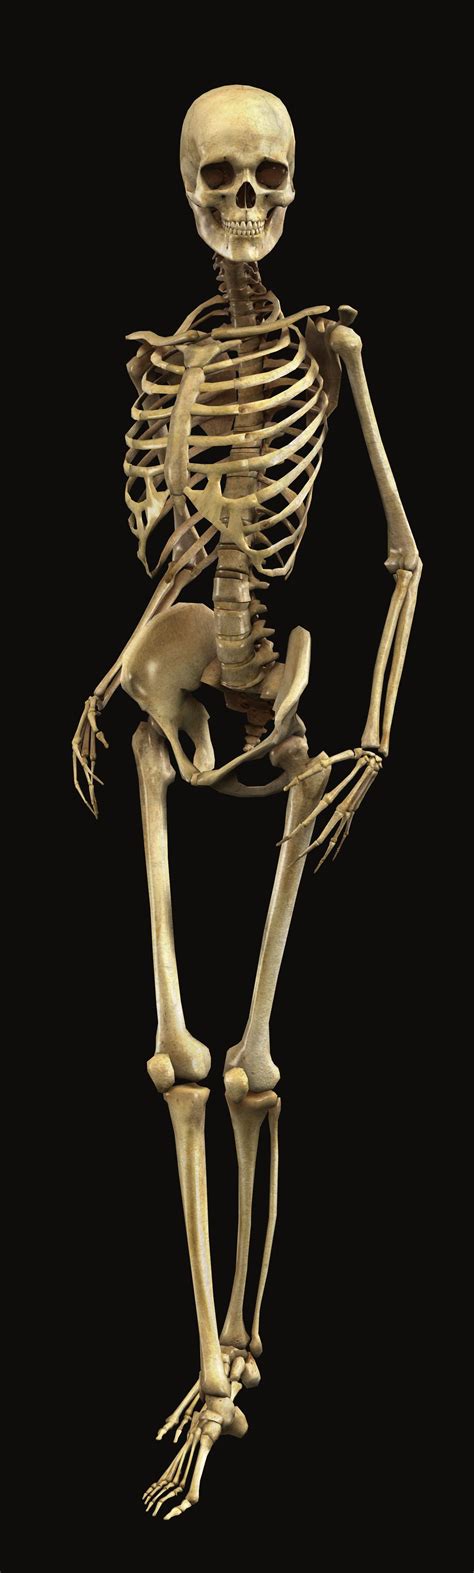 Print Quality Human Skeleton Click To Website For 1356x4500 Pixel